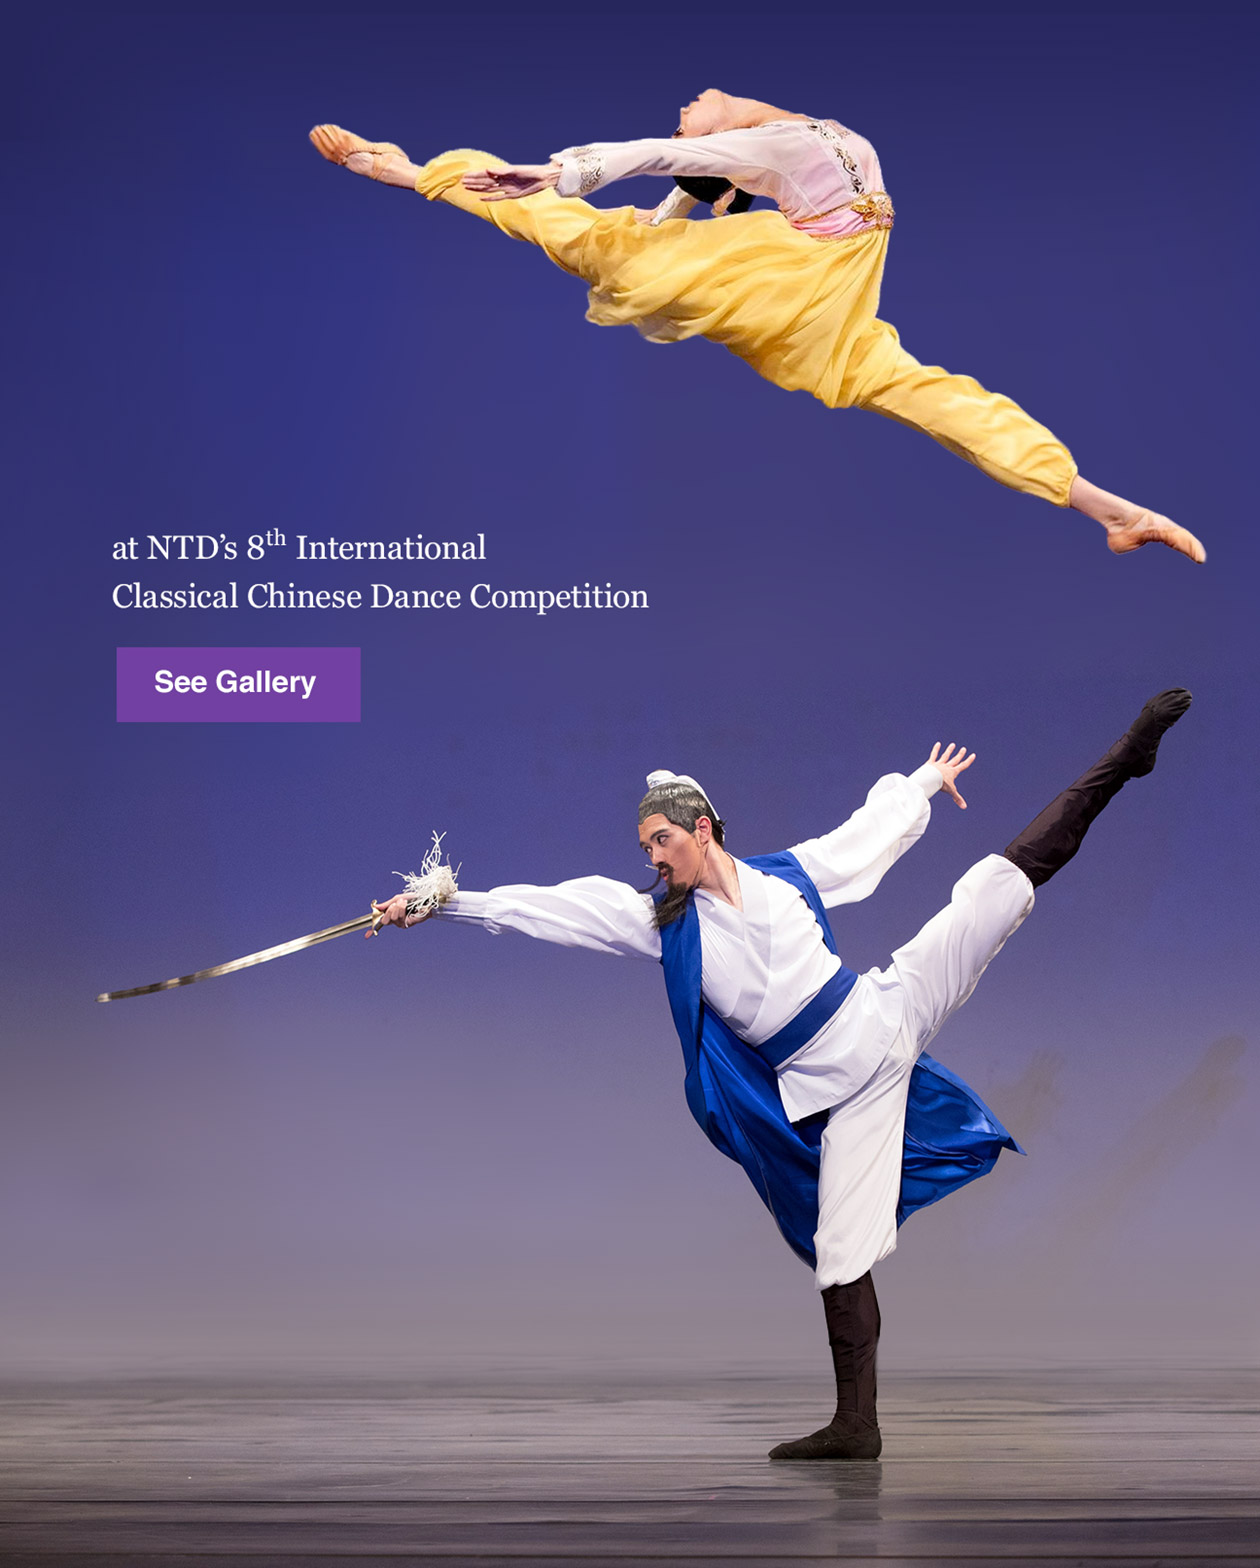 NTD’s 8th International Classical Chinese Dance Competition